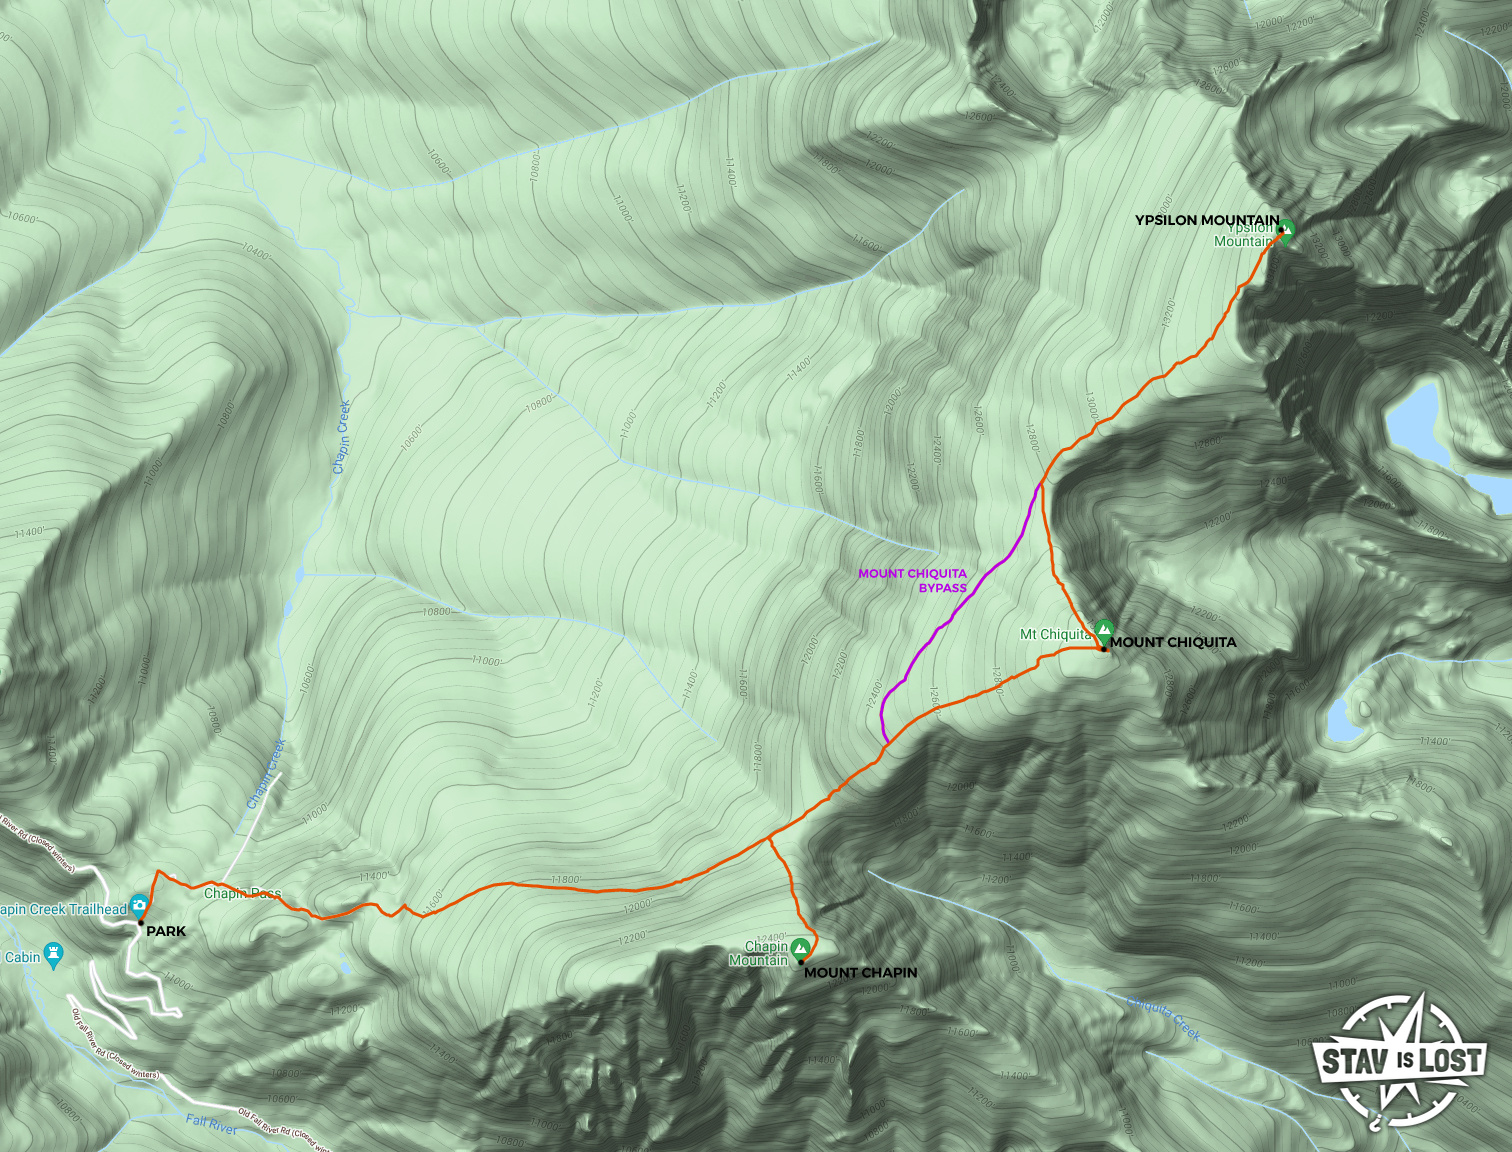 map for Mount Chapin, Mount Chiquita, Ypsilon Mountain by stav is lost